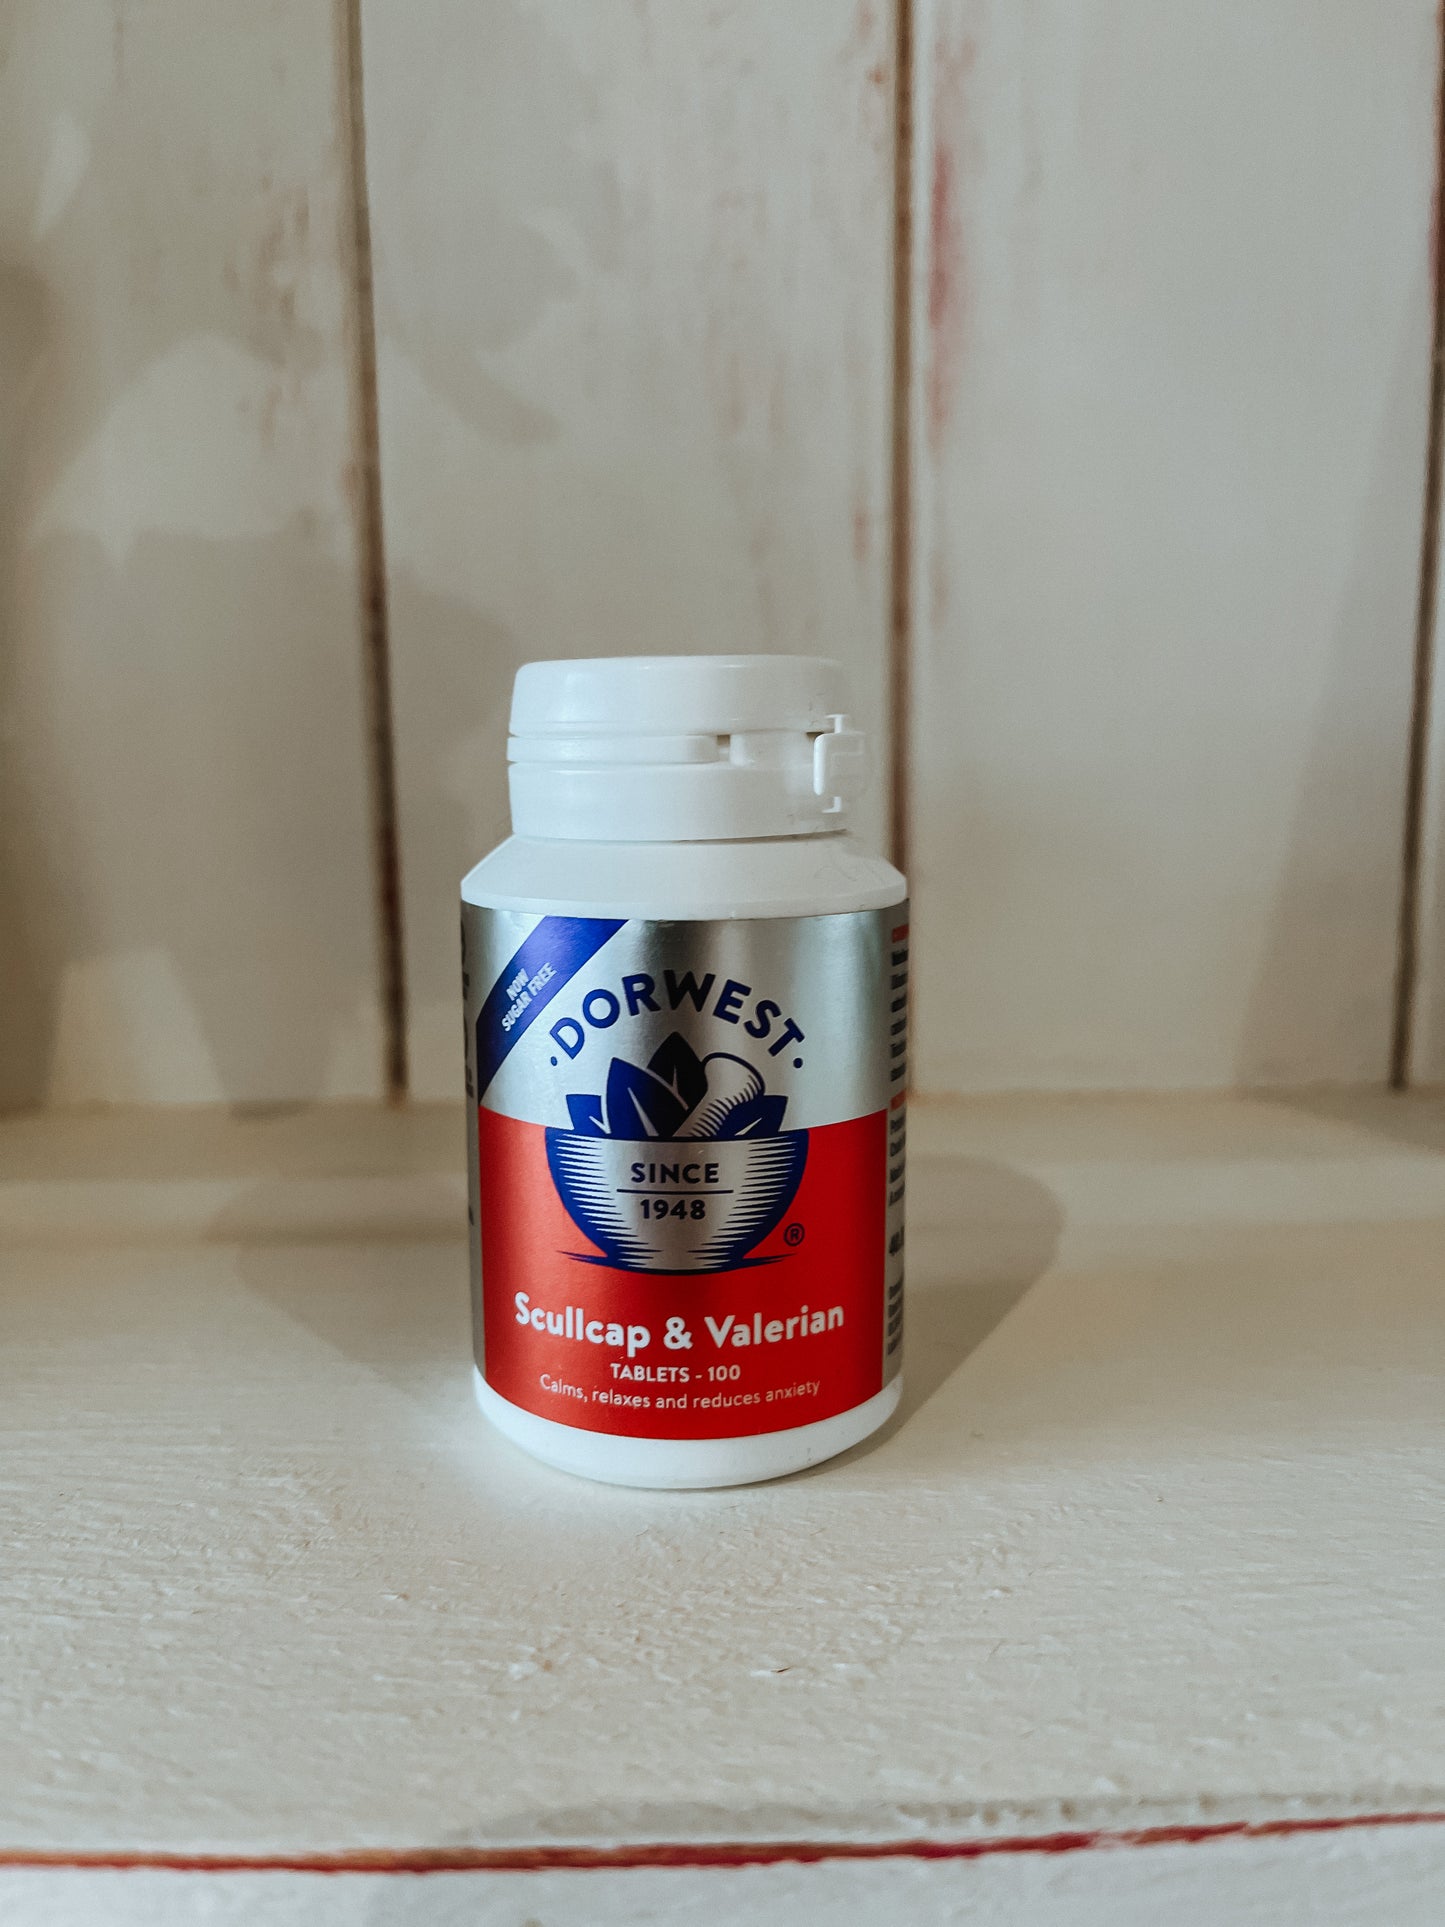 Dorwest Scullcap & Valerian Tablets For Dogs & Cats